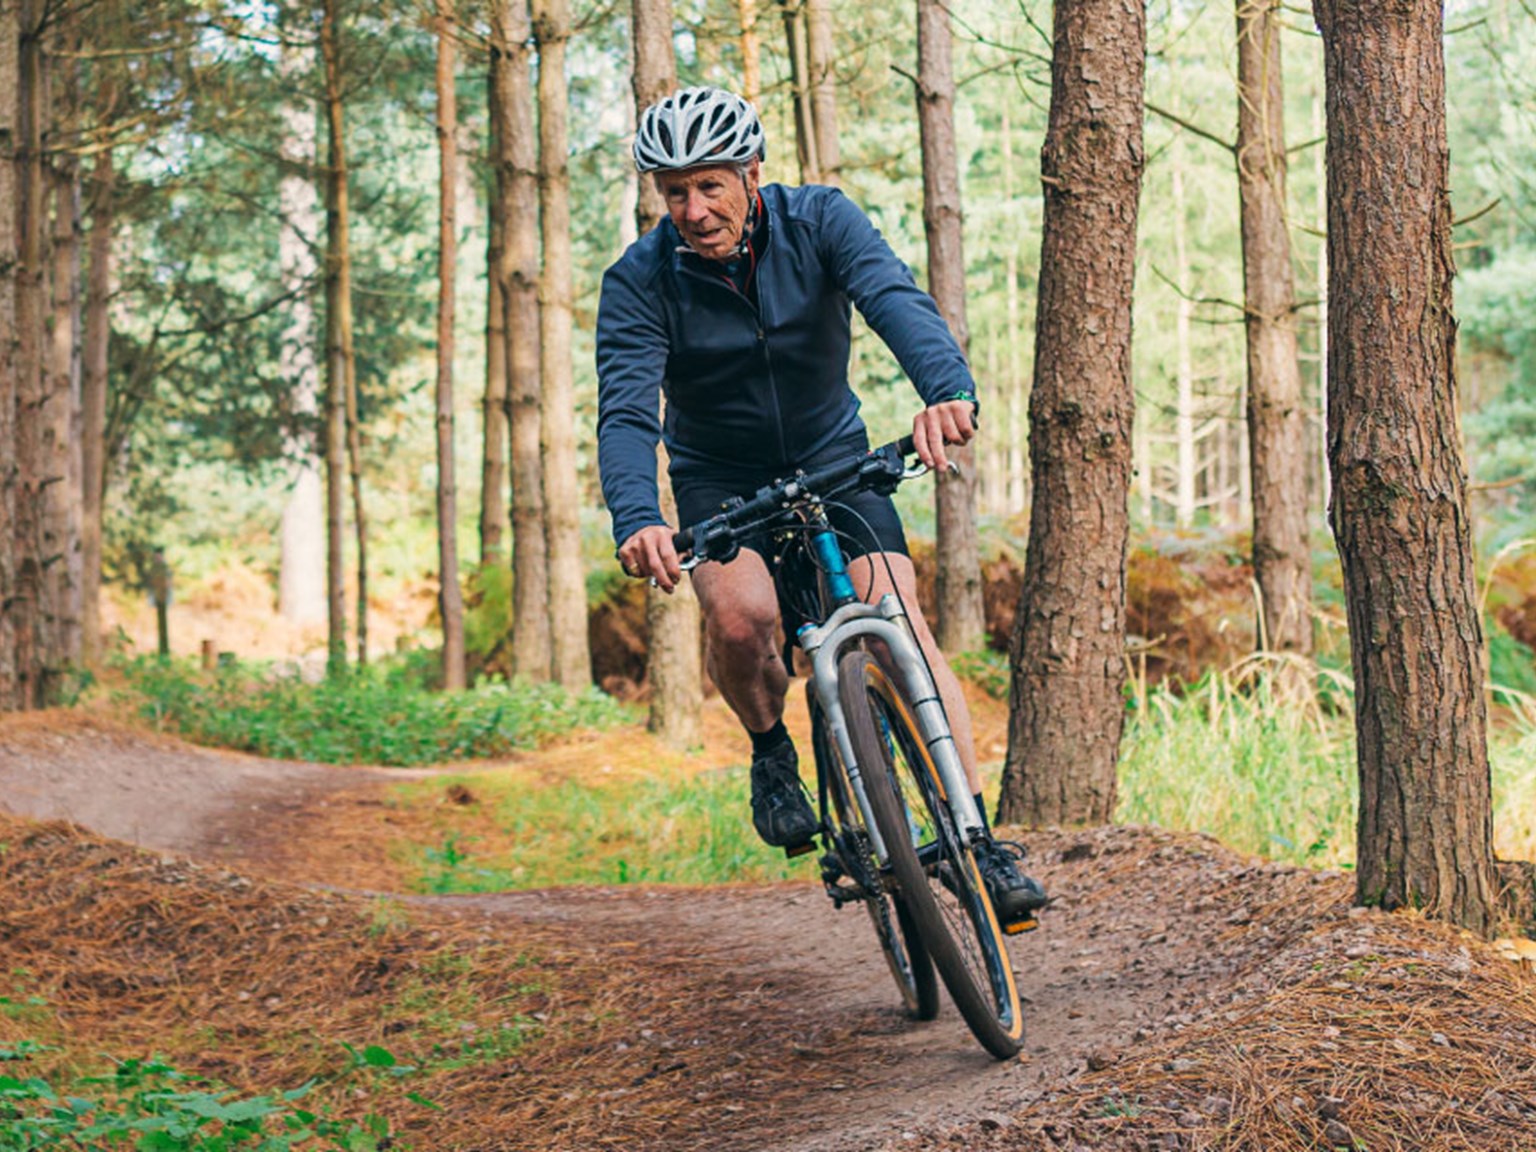 A man in his later years mountain biking through the woods